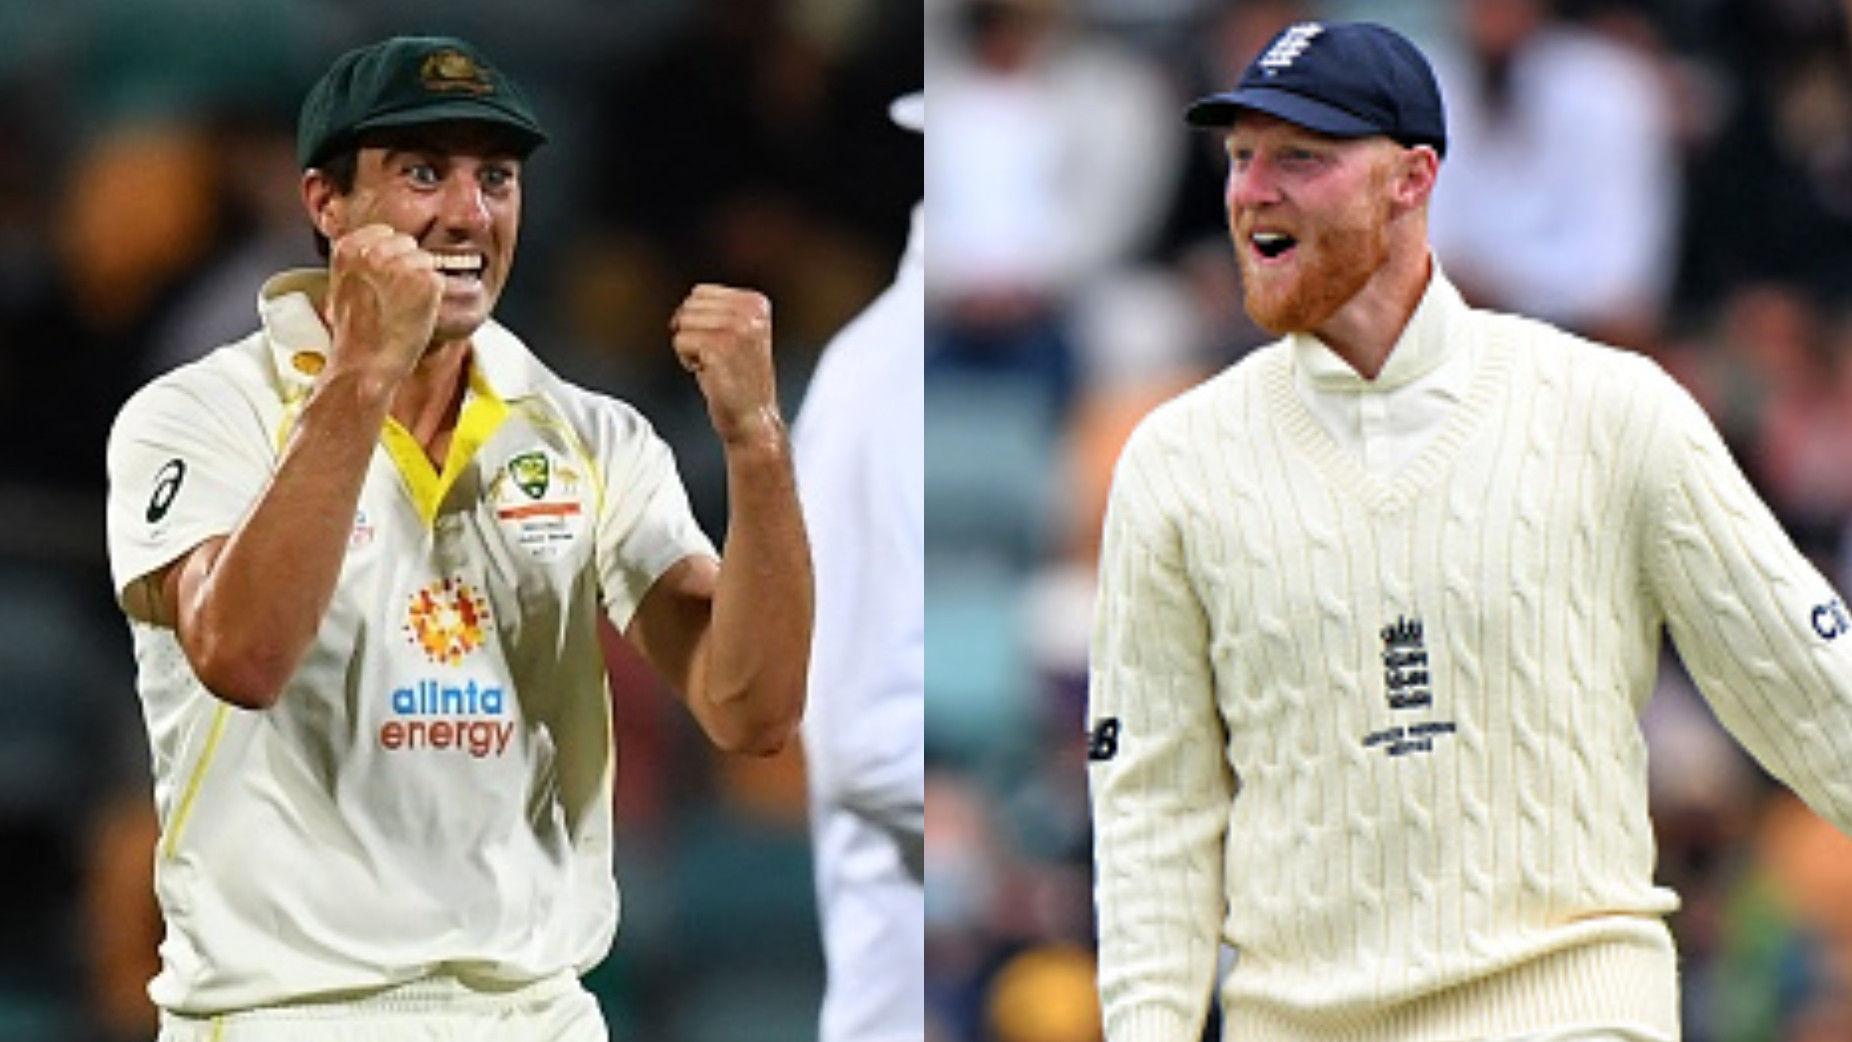 England and Australia to clash in Men's Ashes 2023 with first Test in Edgbaston on June 16th